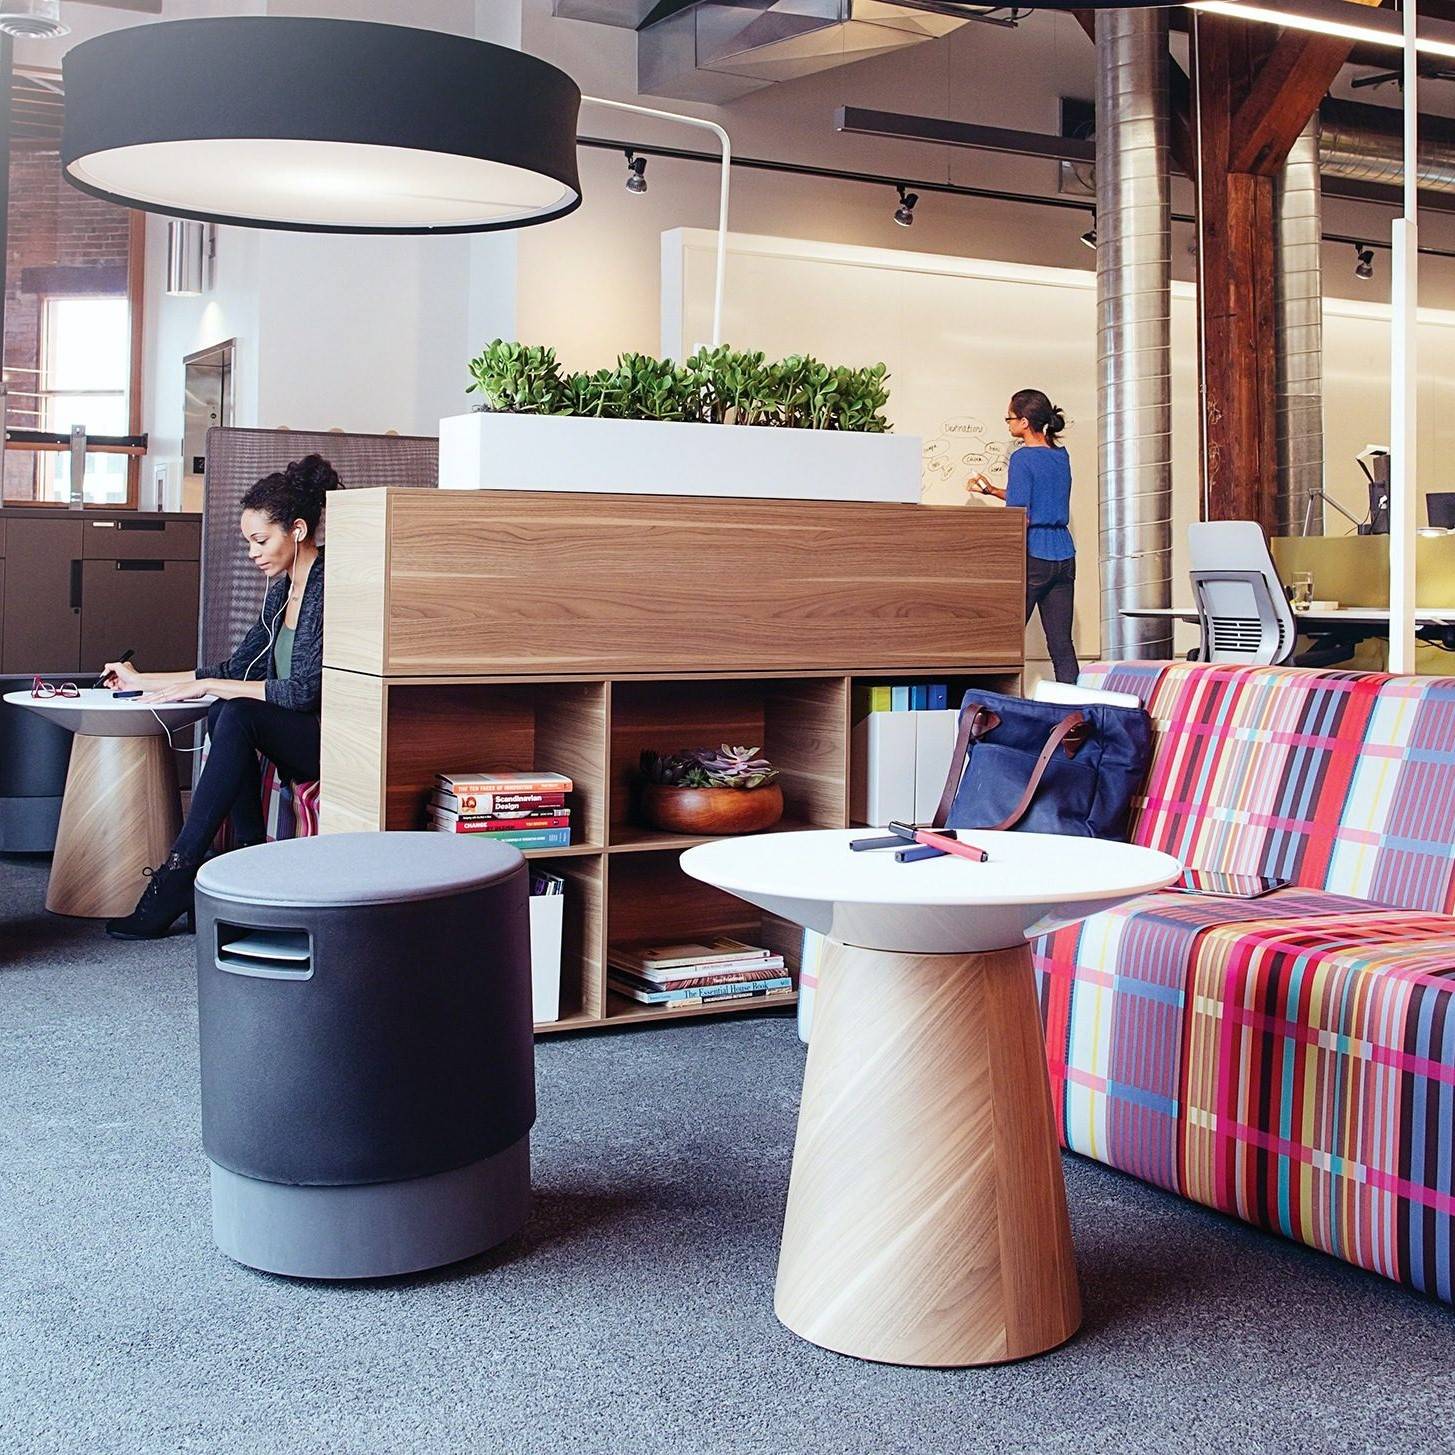 The role of workplace design in employee engagement